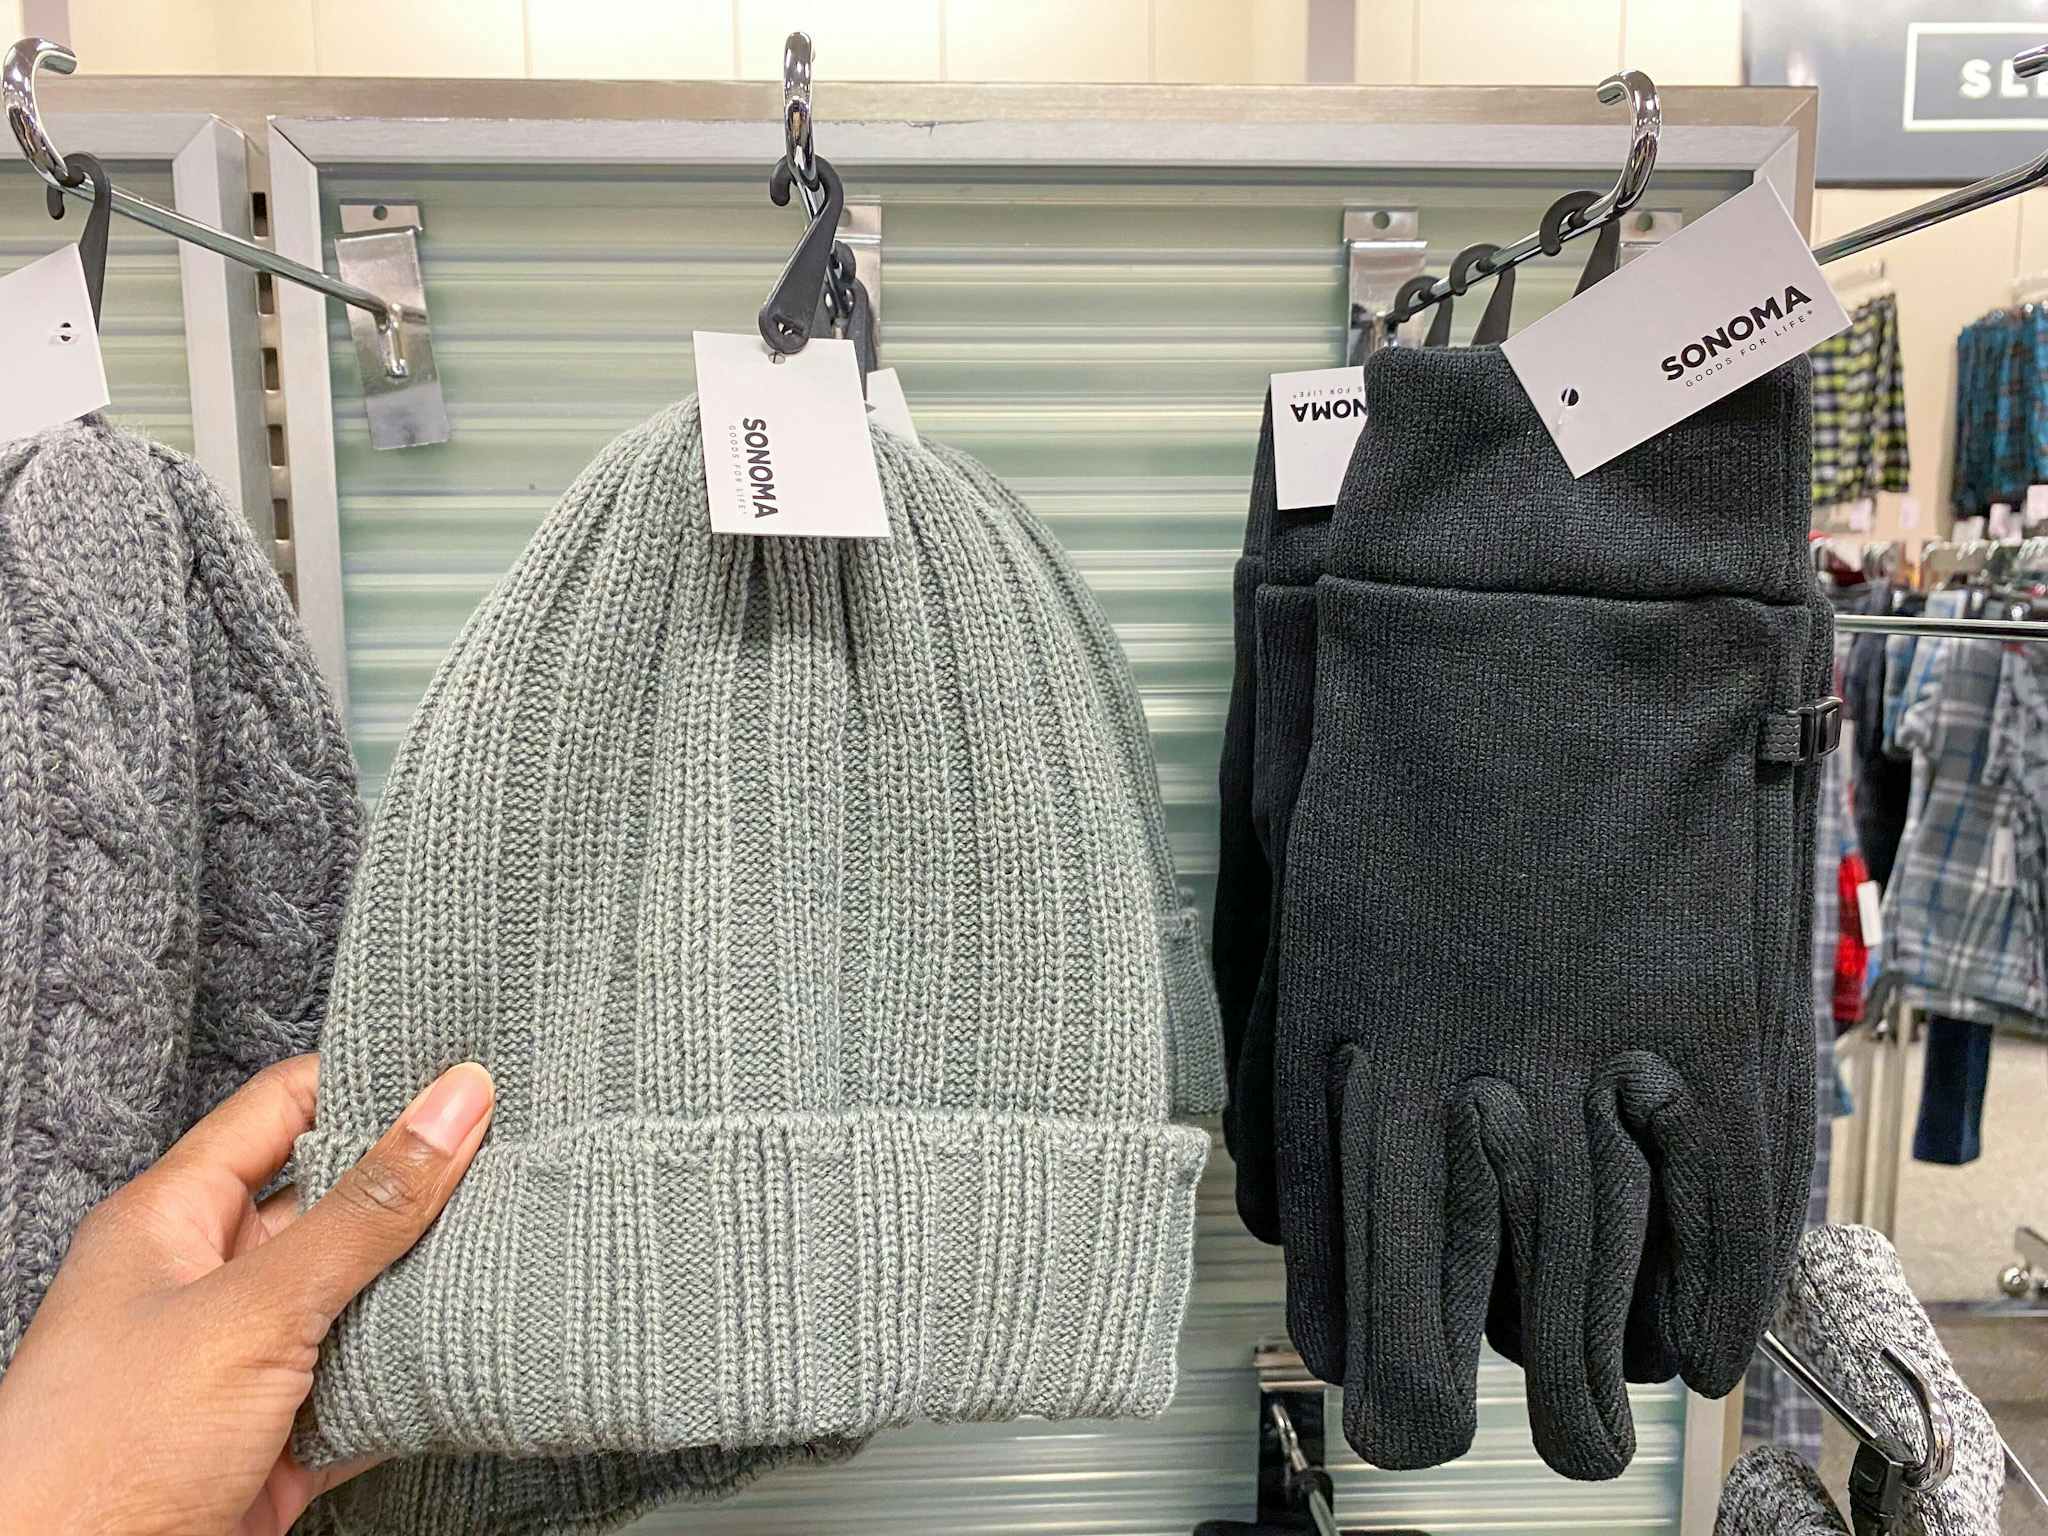 A person's hand taking a beanie from a display of winter hats and gloves in Kohl's.